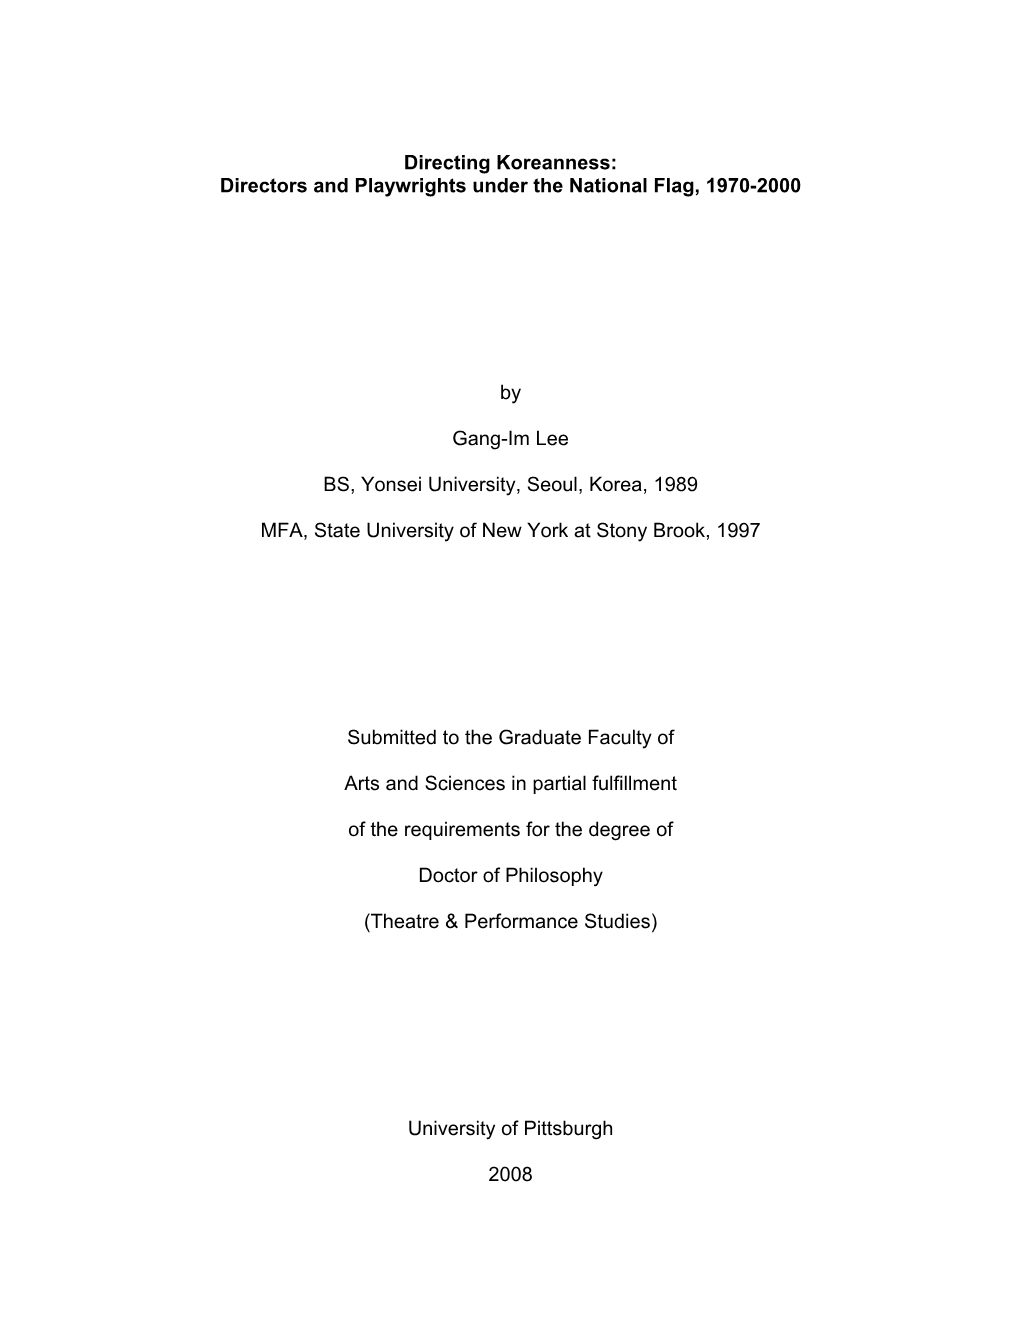 Directing Koreanness: Directors and Playwrights Under the National Flag, 1970-2000 by Gang-Im Lee BS, Yonsei University, Seoul